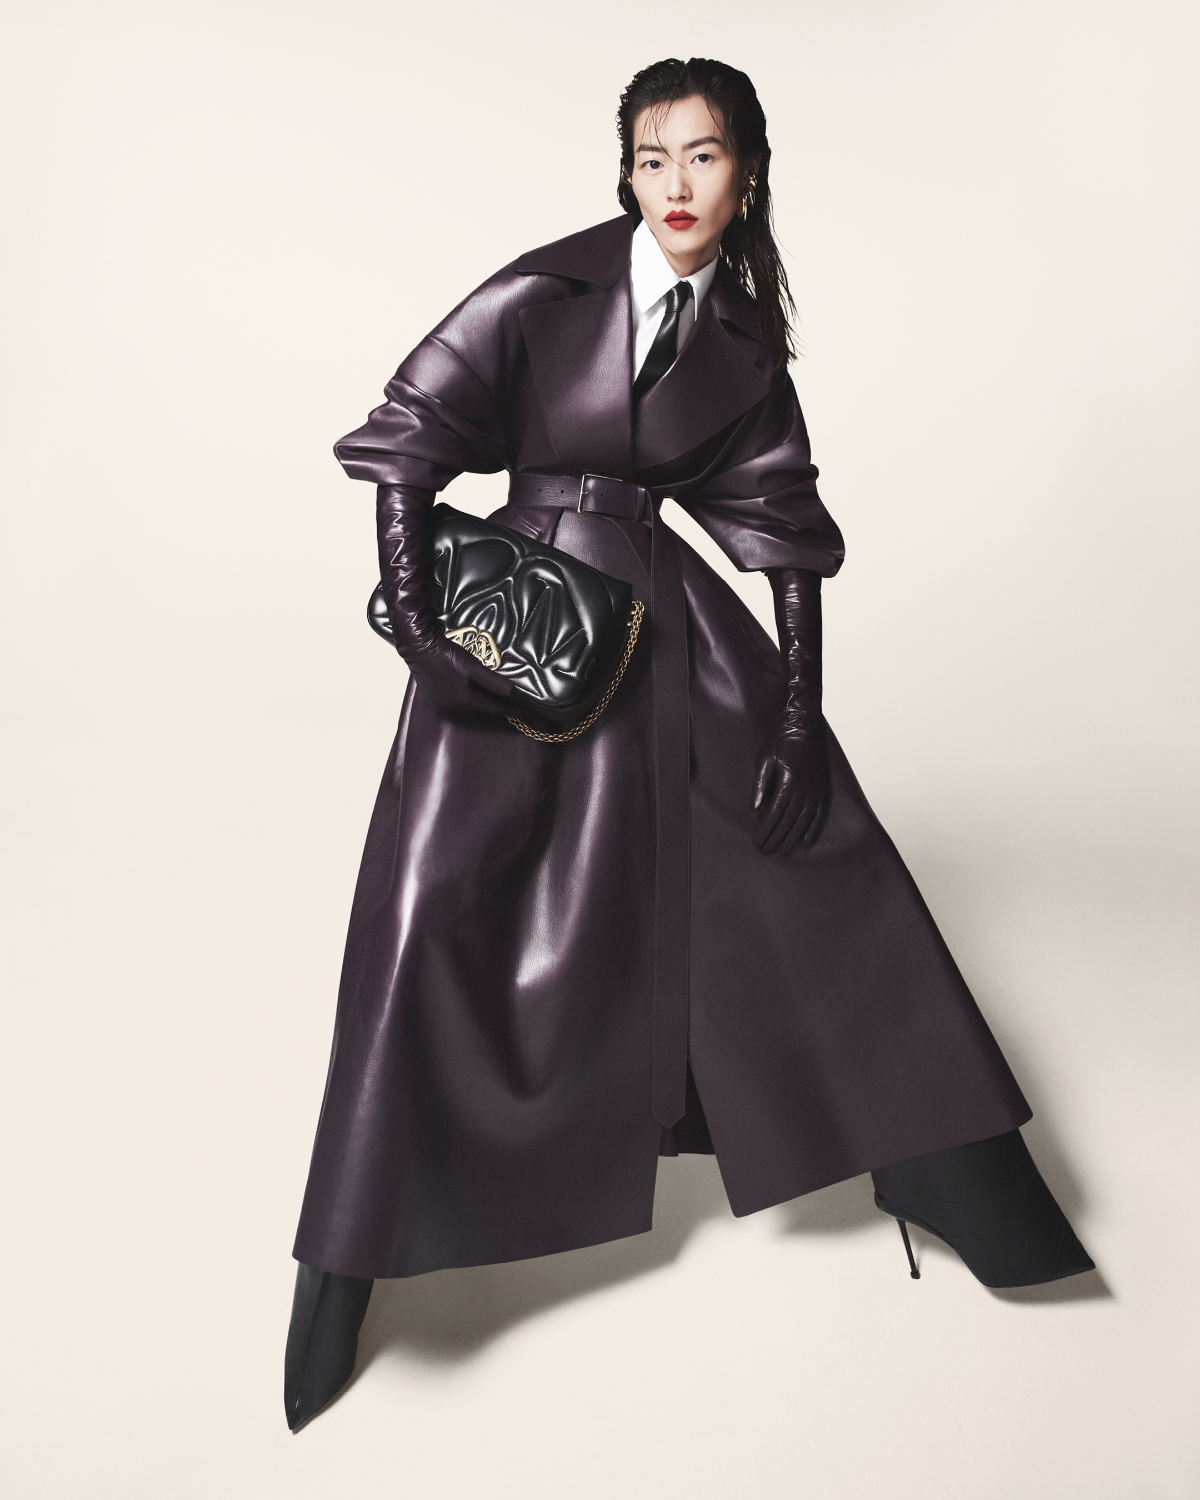 Alexander McQueen Launches Its New Autumn/Winter 2023 Collection Campaign